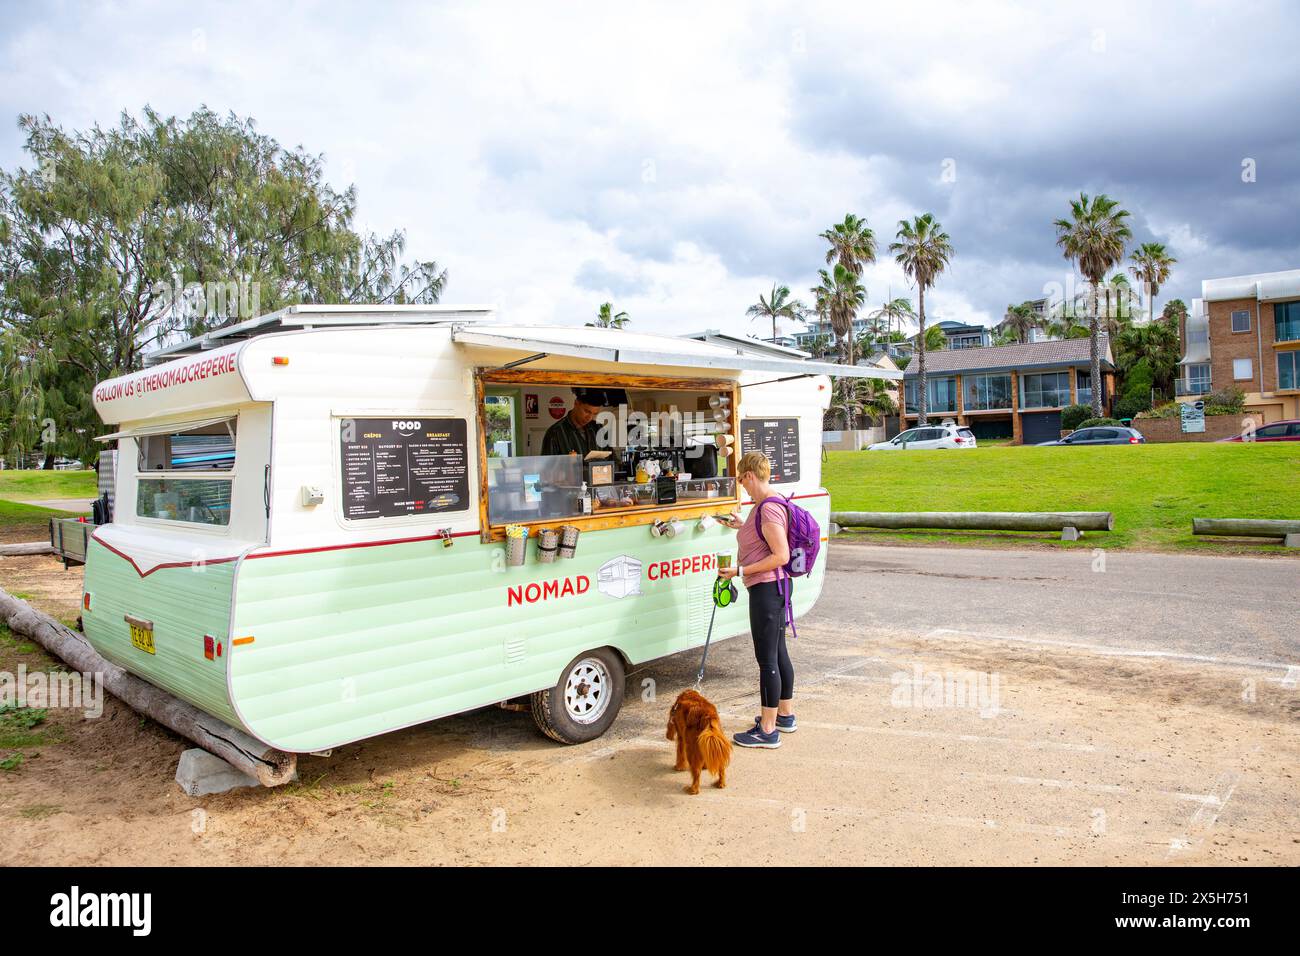 Mobile food and drink creperie stall in vintage caravan parked in Curl Curl, model released woman with pet cavoodle orders food,Sydney,NSW,Australia Stock Photo